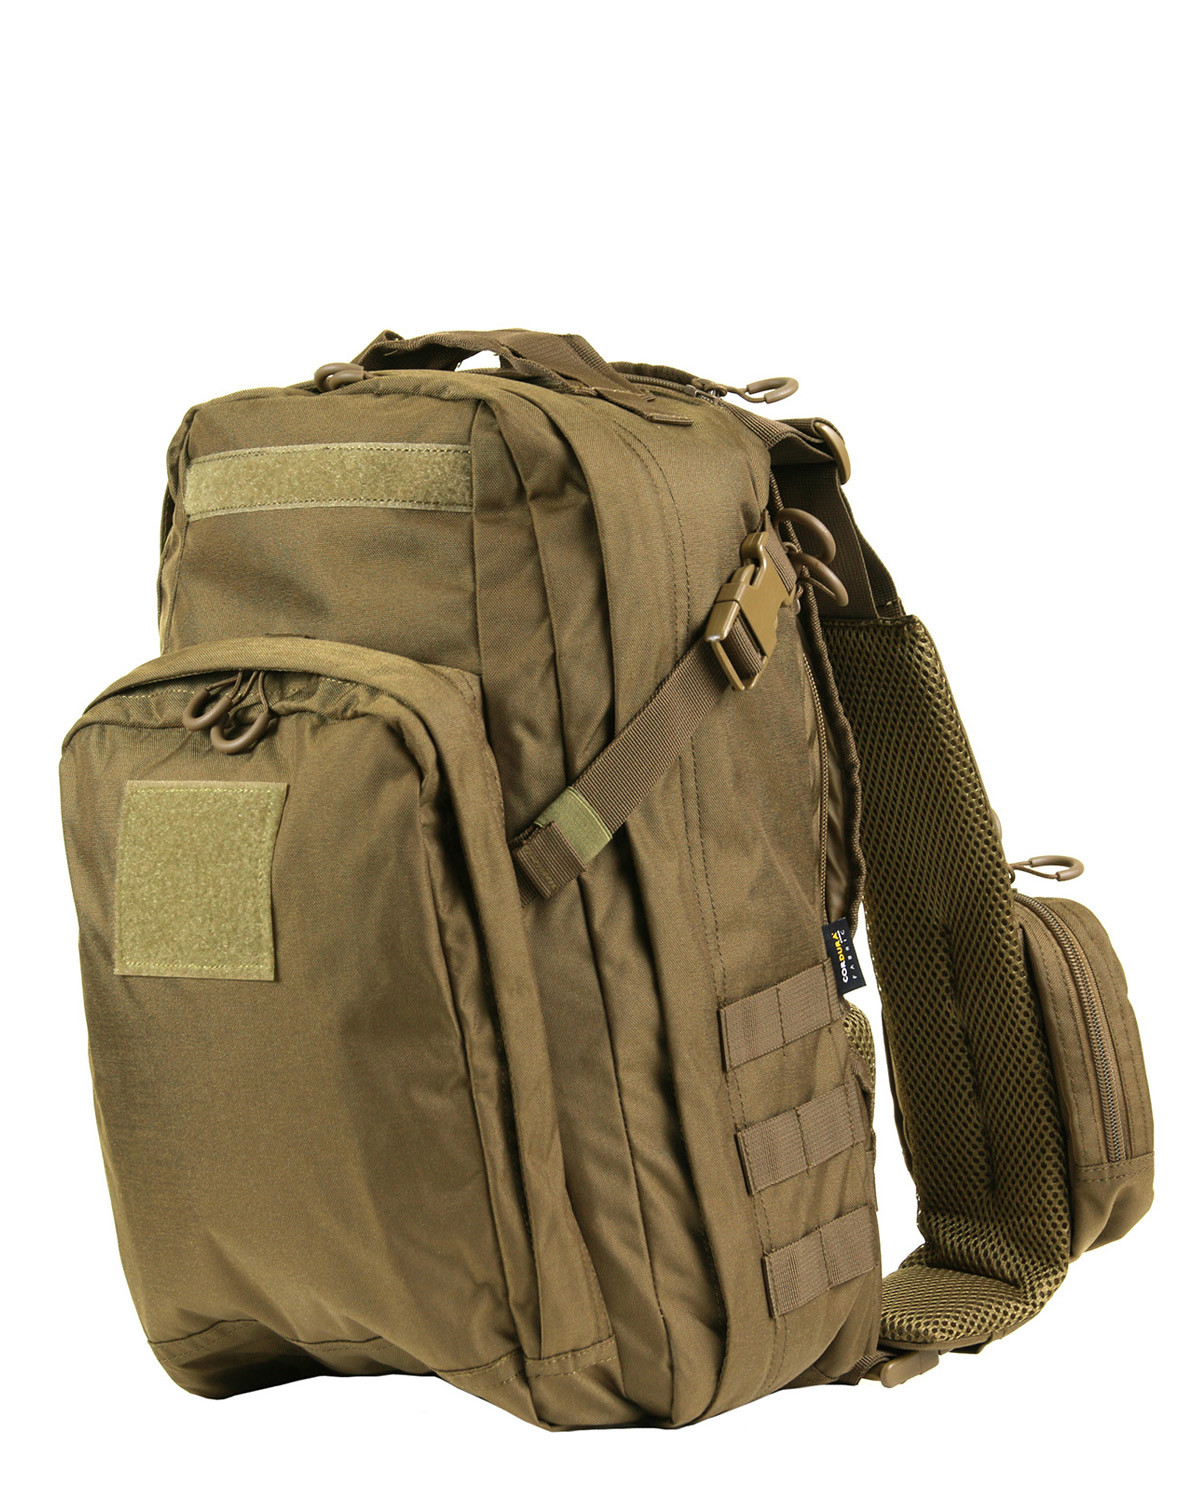 Fostex TF-2215 Multi Sling Bag (Coyote Brun, One Size)